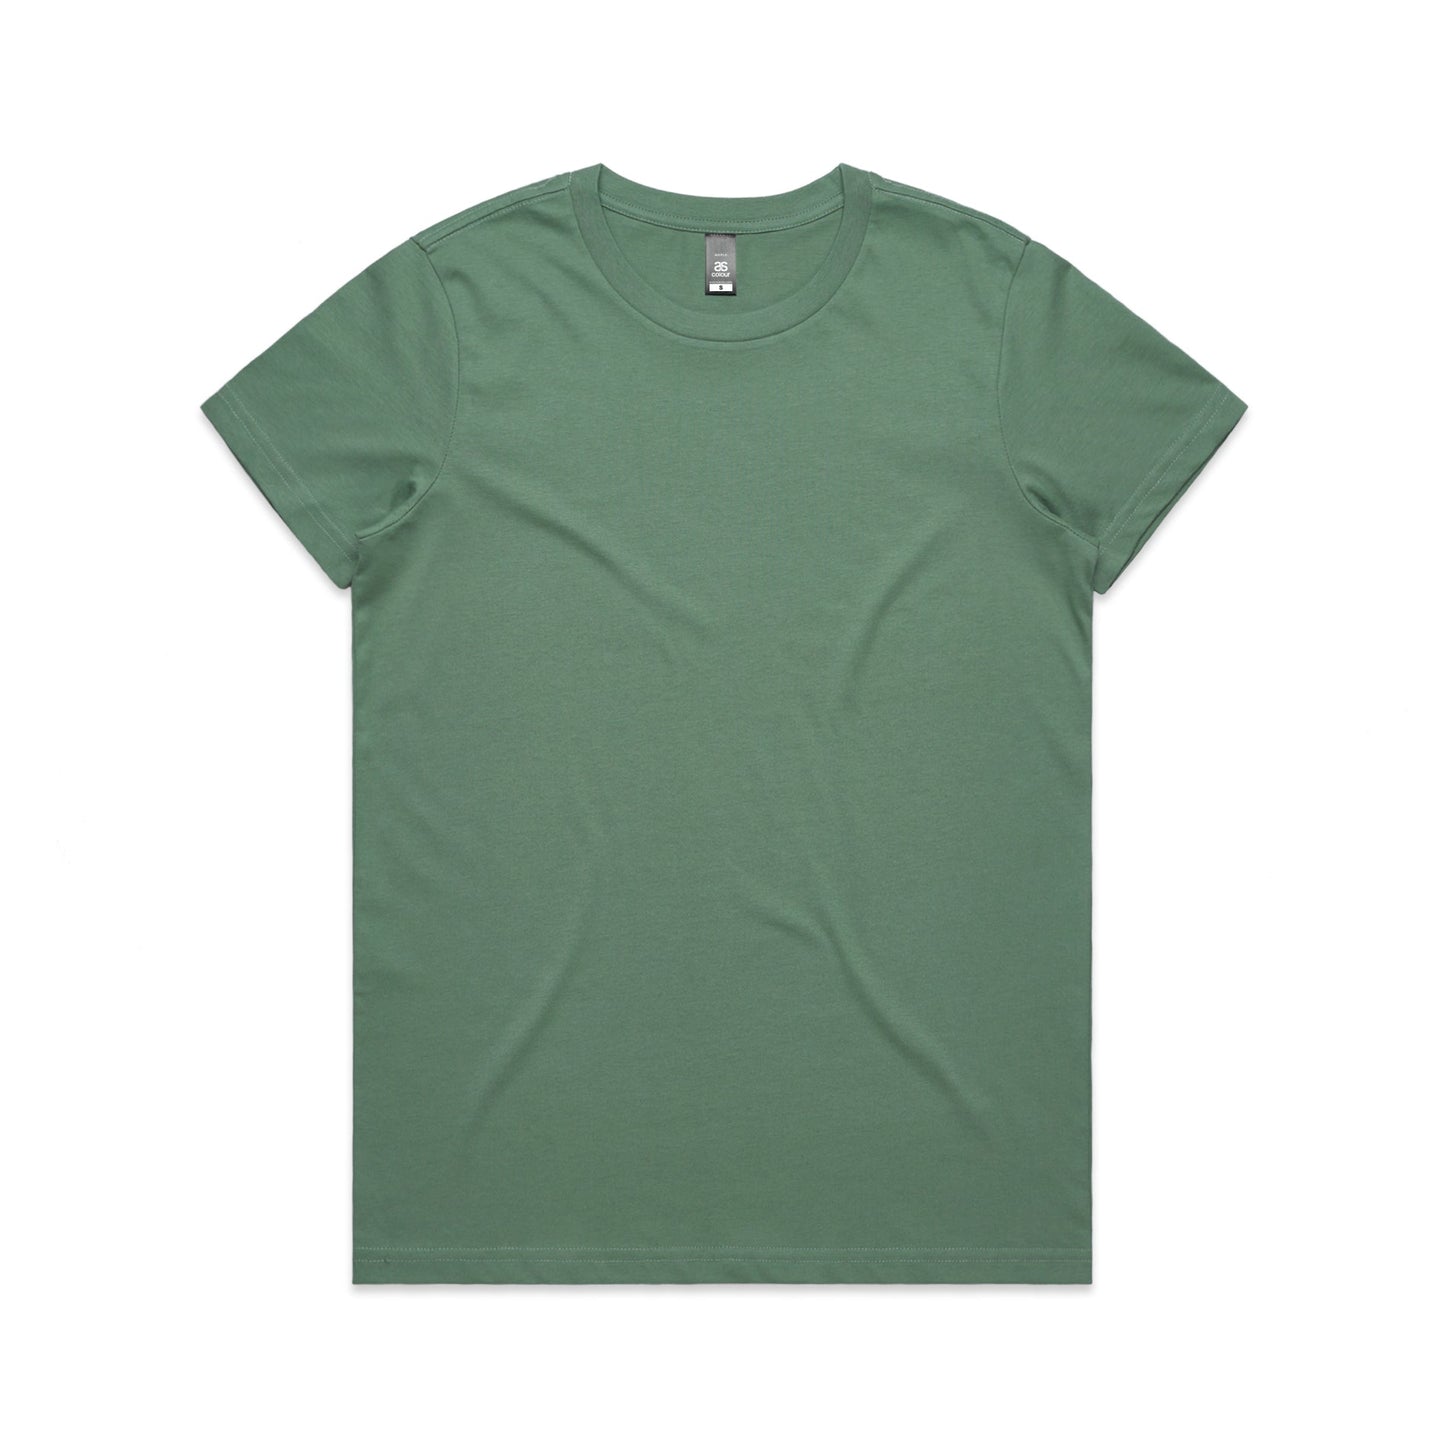 "Inclusion Matters" Relaxed Maple T-Shirt